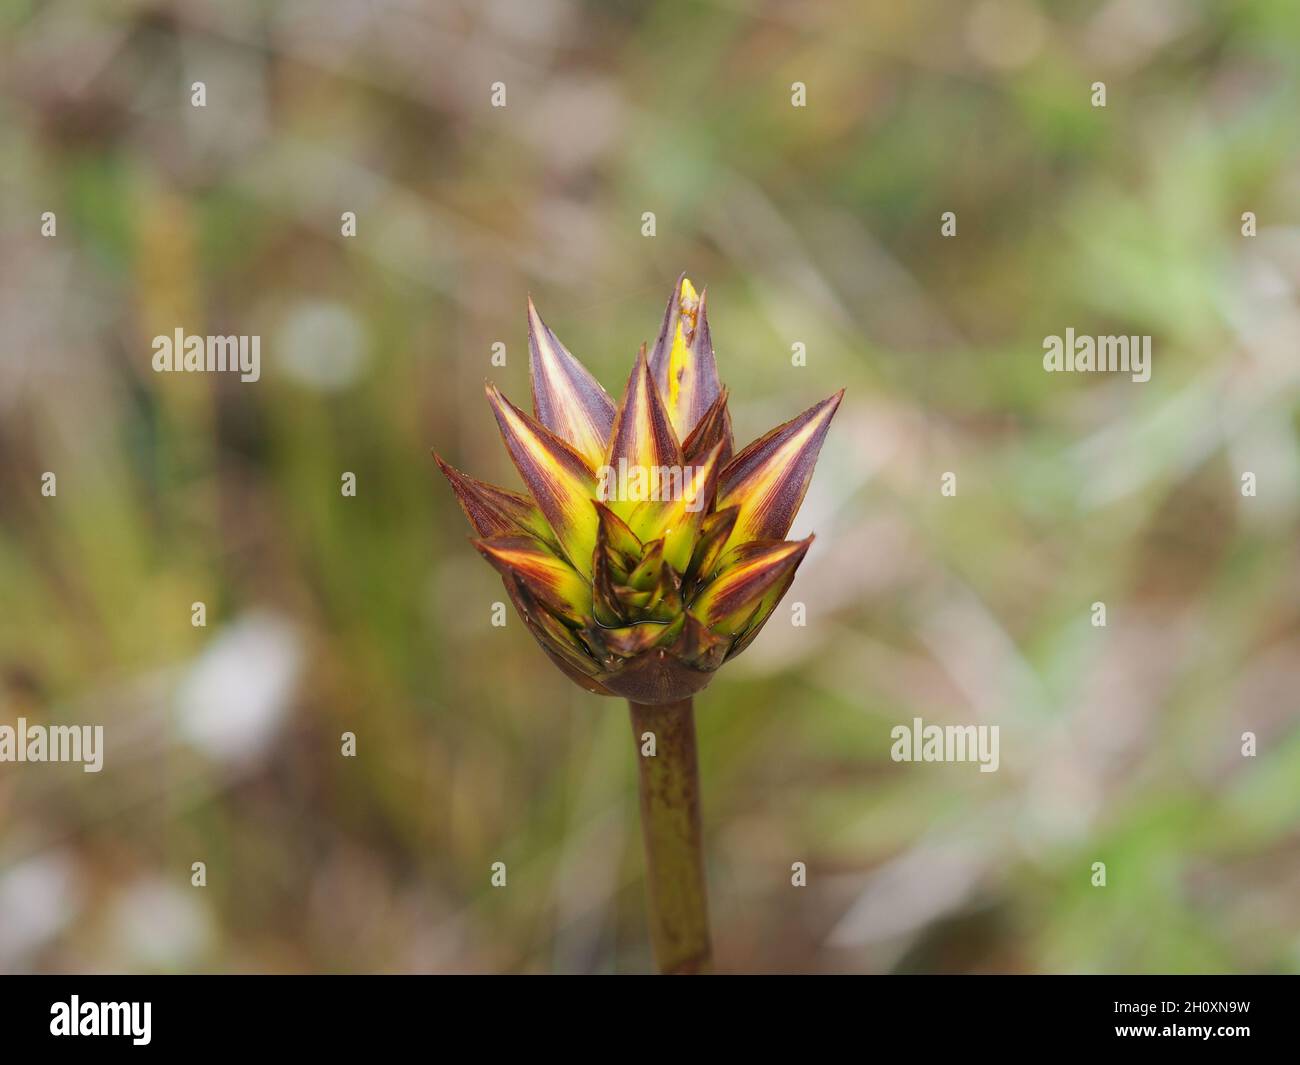 Closeup shot of a capitate sedge plant on a blurred background Stock Photo